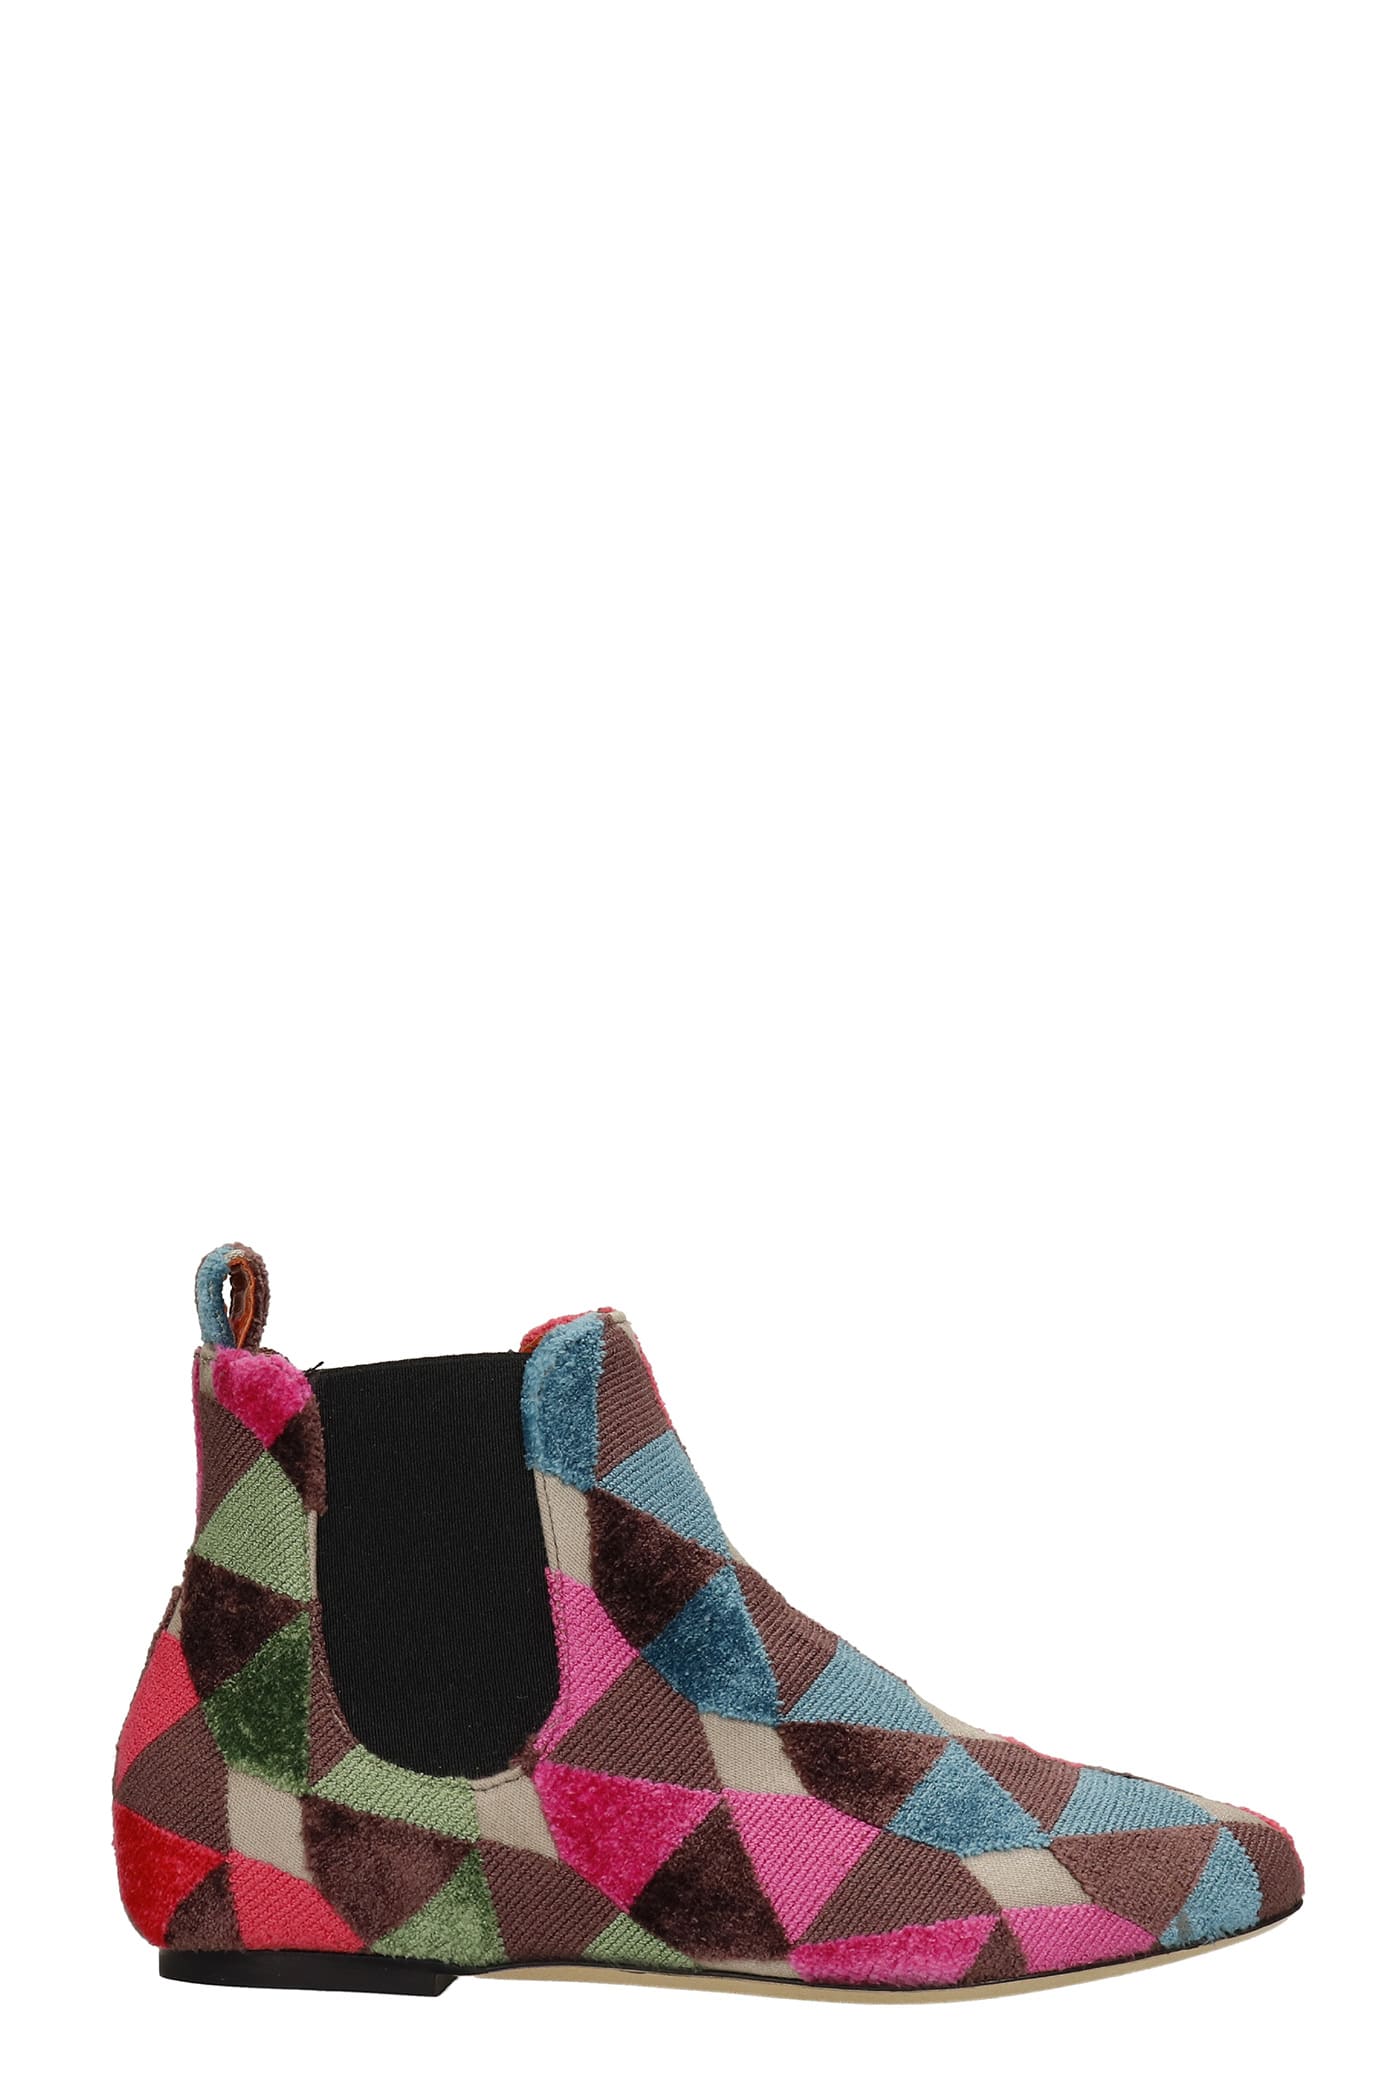 Bams Beatles Low Heels Ankle Boots In Multicolor Fabric